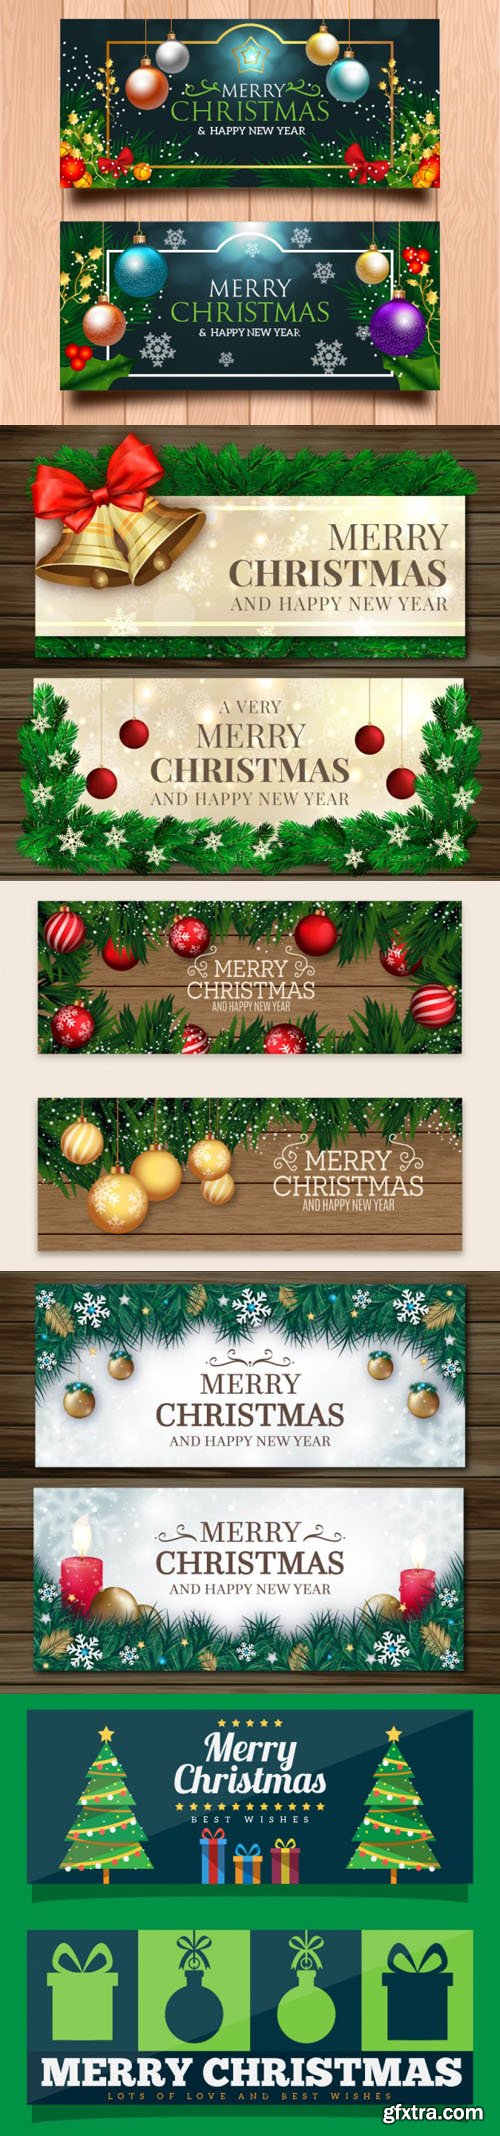 5 Christmas and New Year Banners in Vector [AI/EPS]